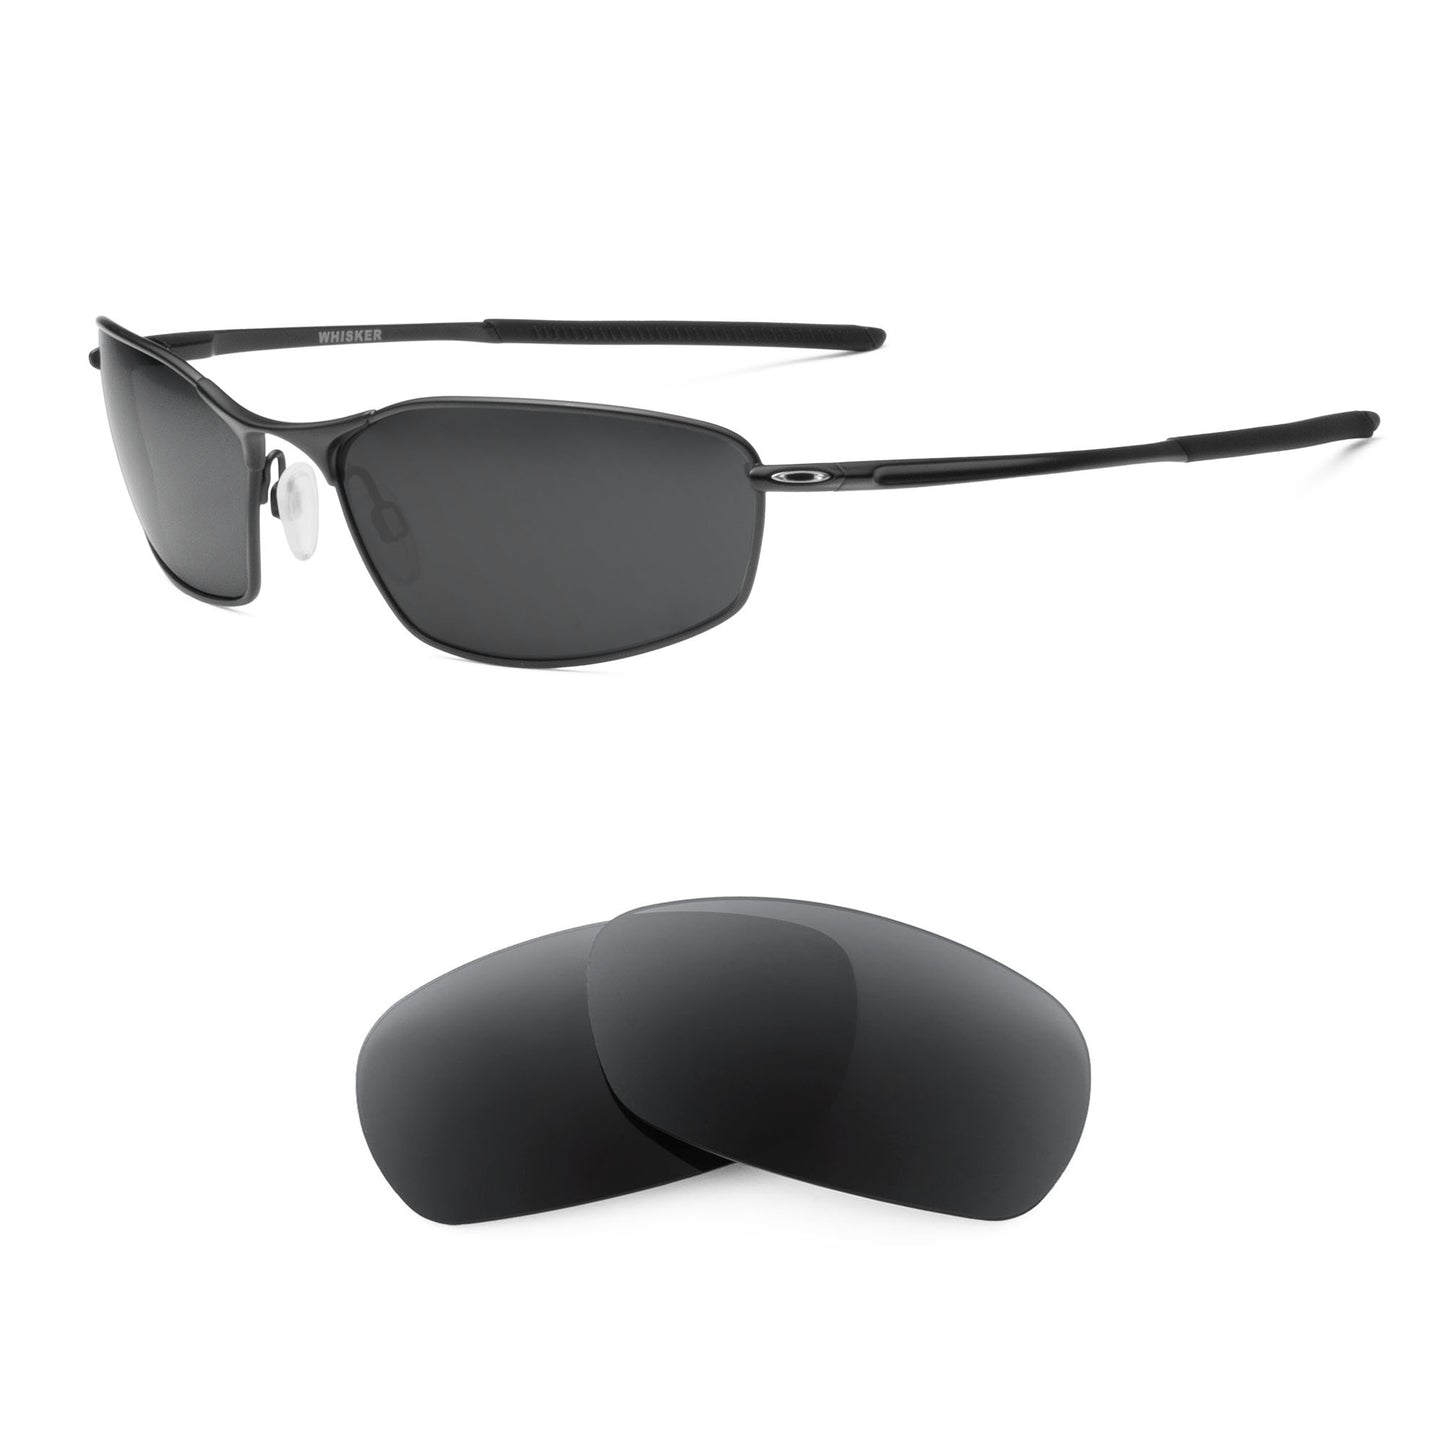 Oakley Whisker (2020) sunglasses with replacement lenses